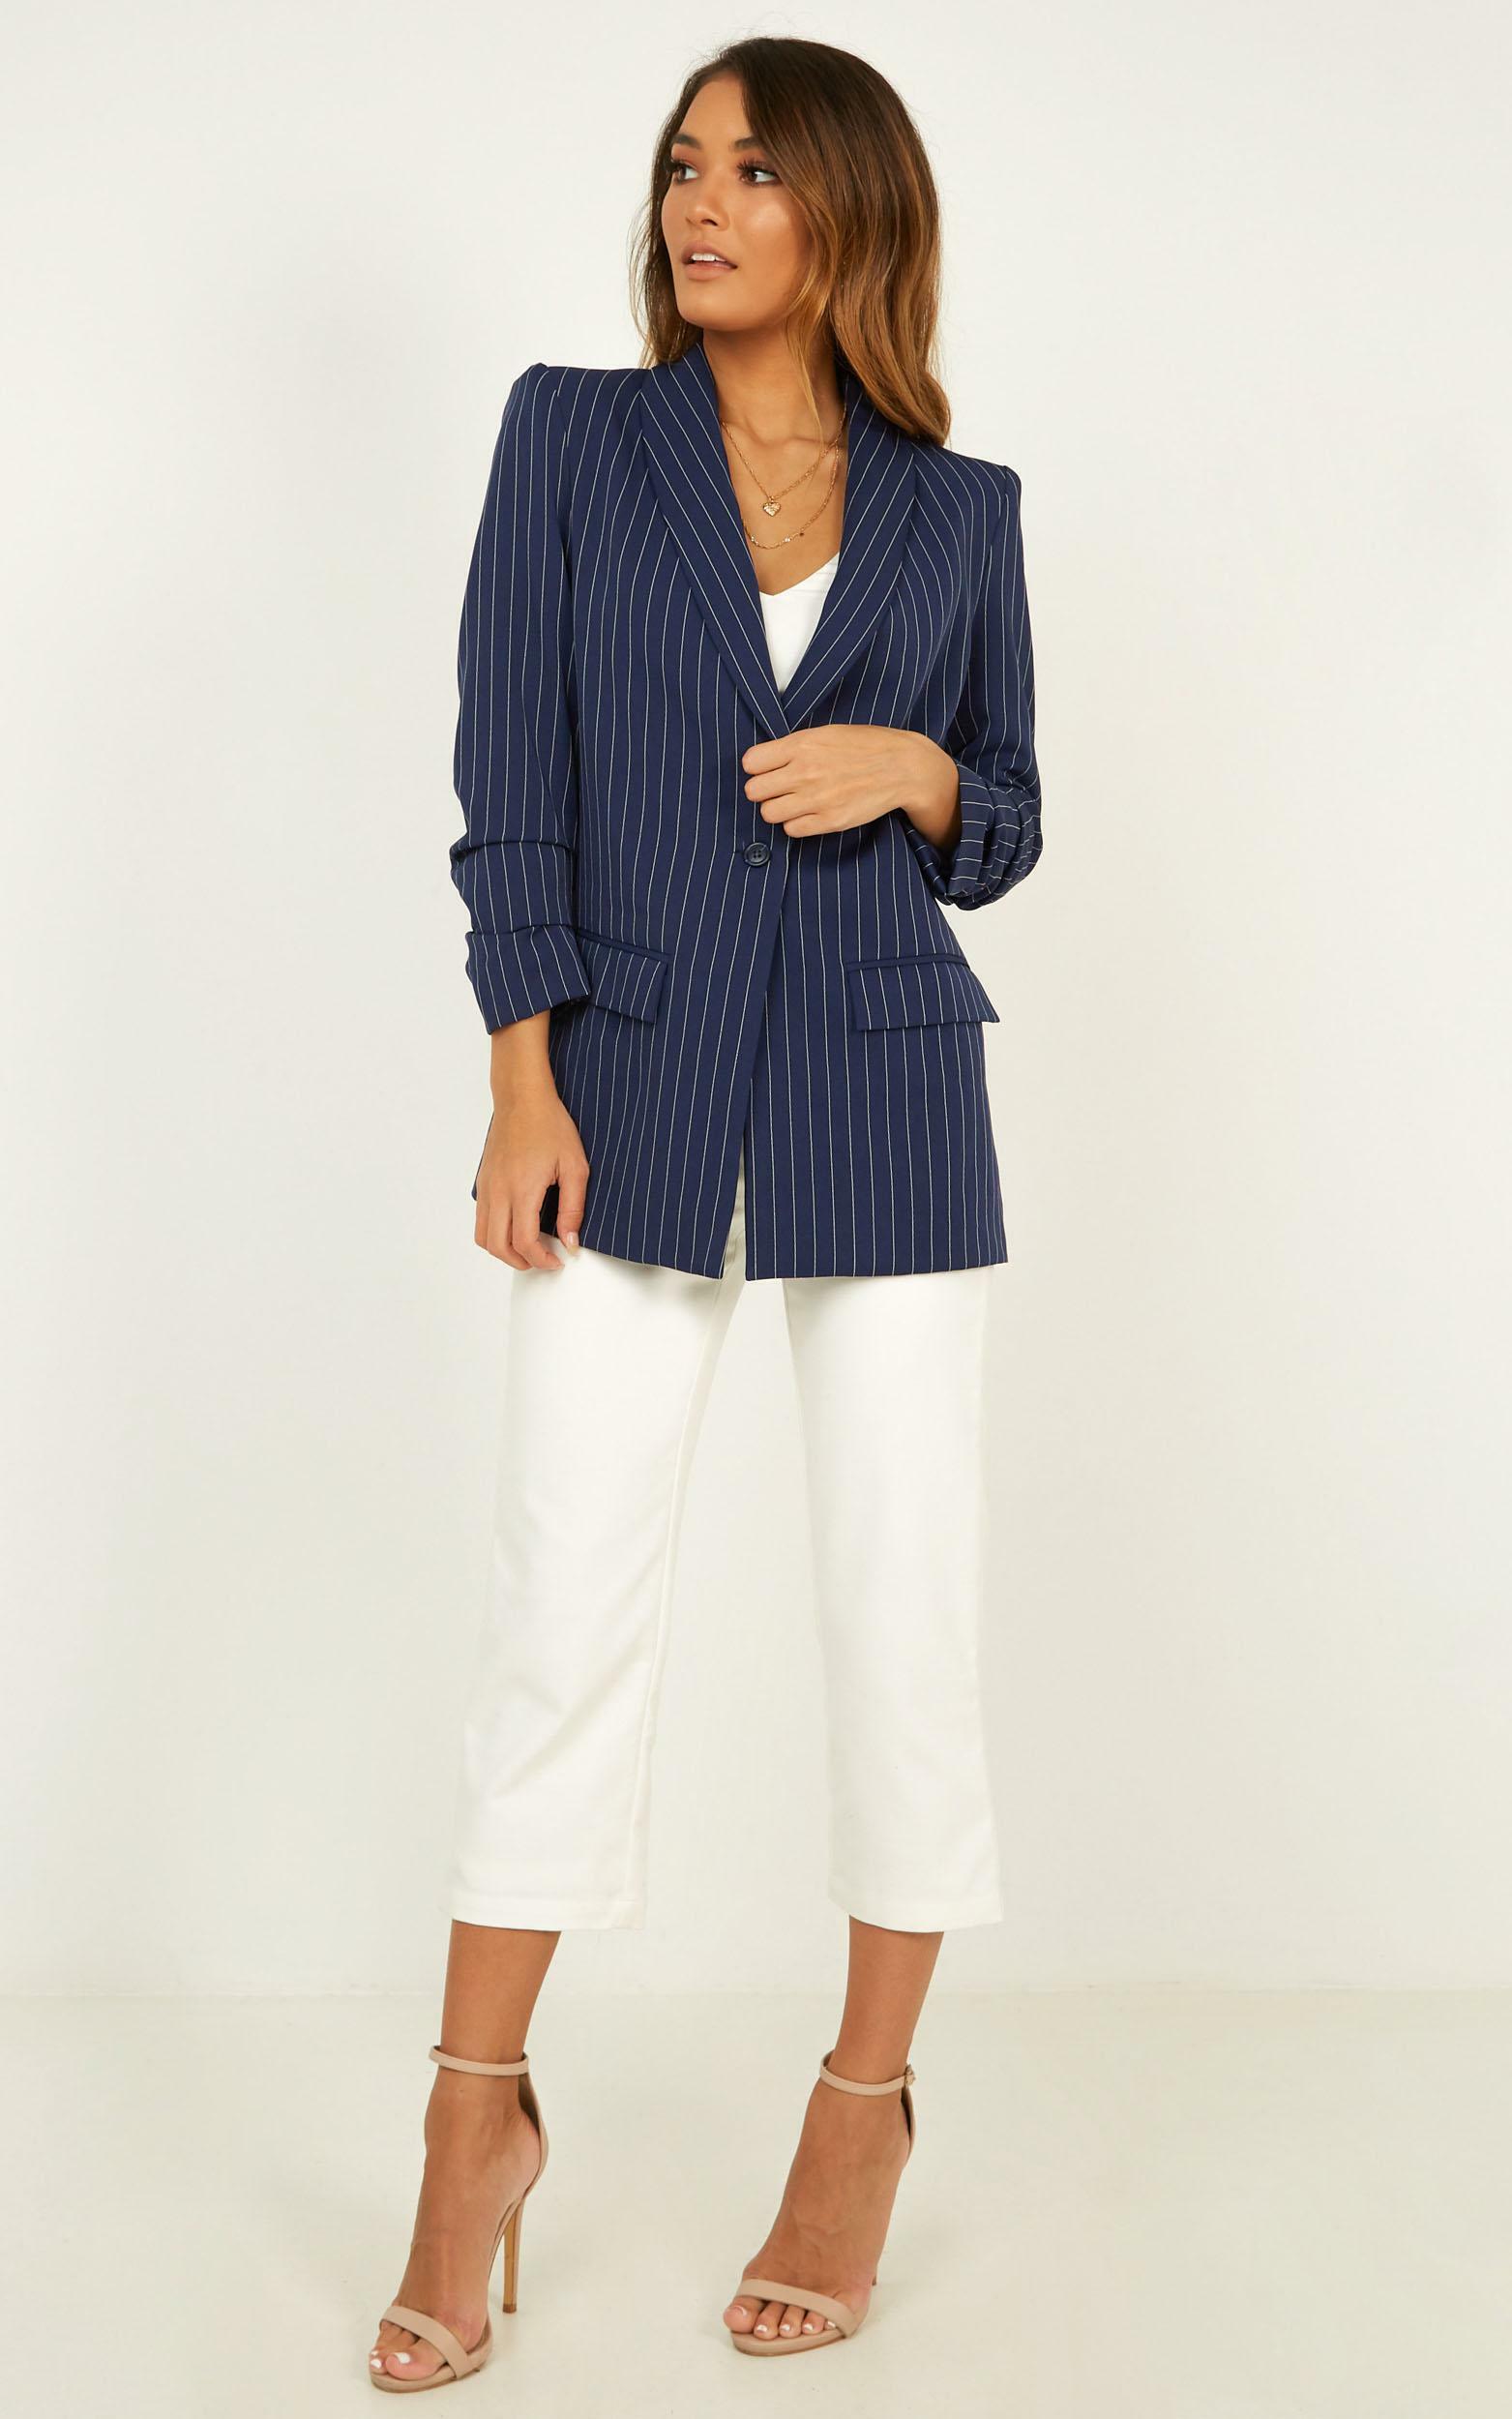 You Should Know Blazer In navy stripe - 16 (XXL), Navy, hi-res image number null